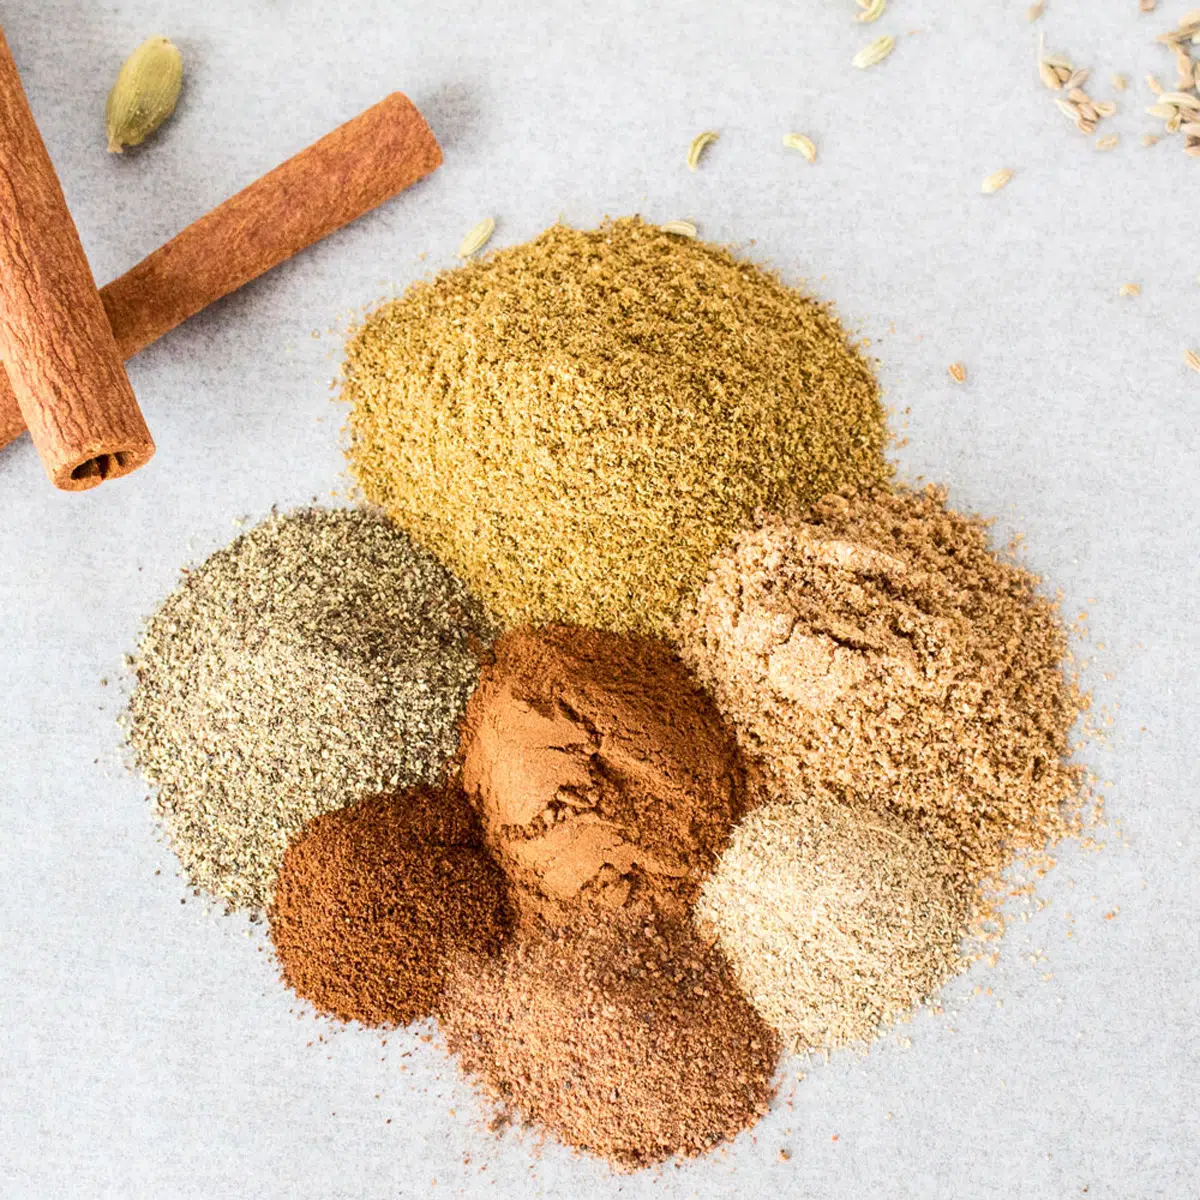 Square image of garam masala spices on a white background.